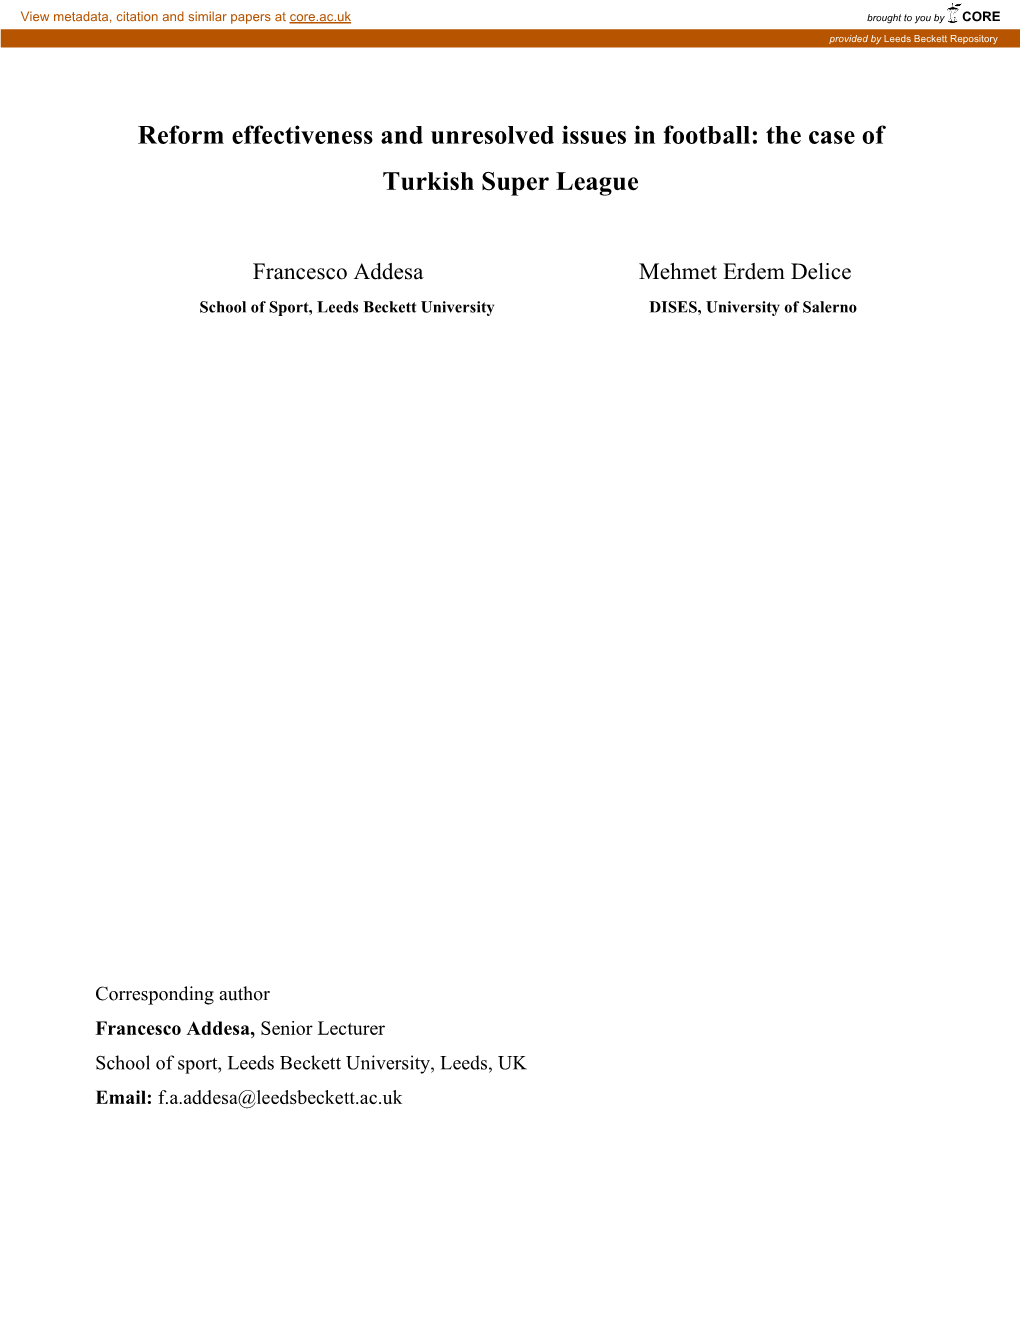 Reform Effectiveness and Unresolved Issues in Football: the Case of Turkish Super League